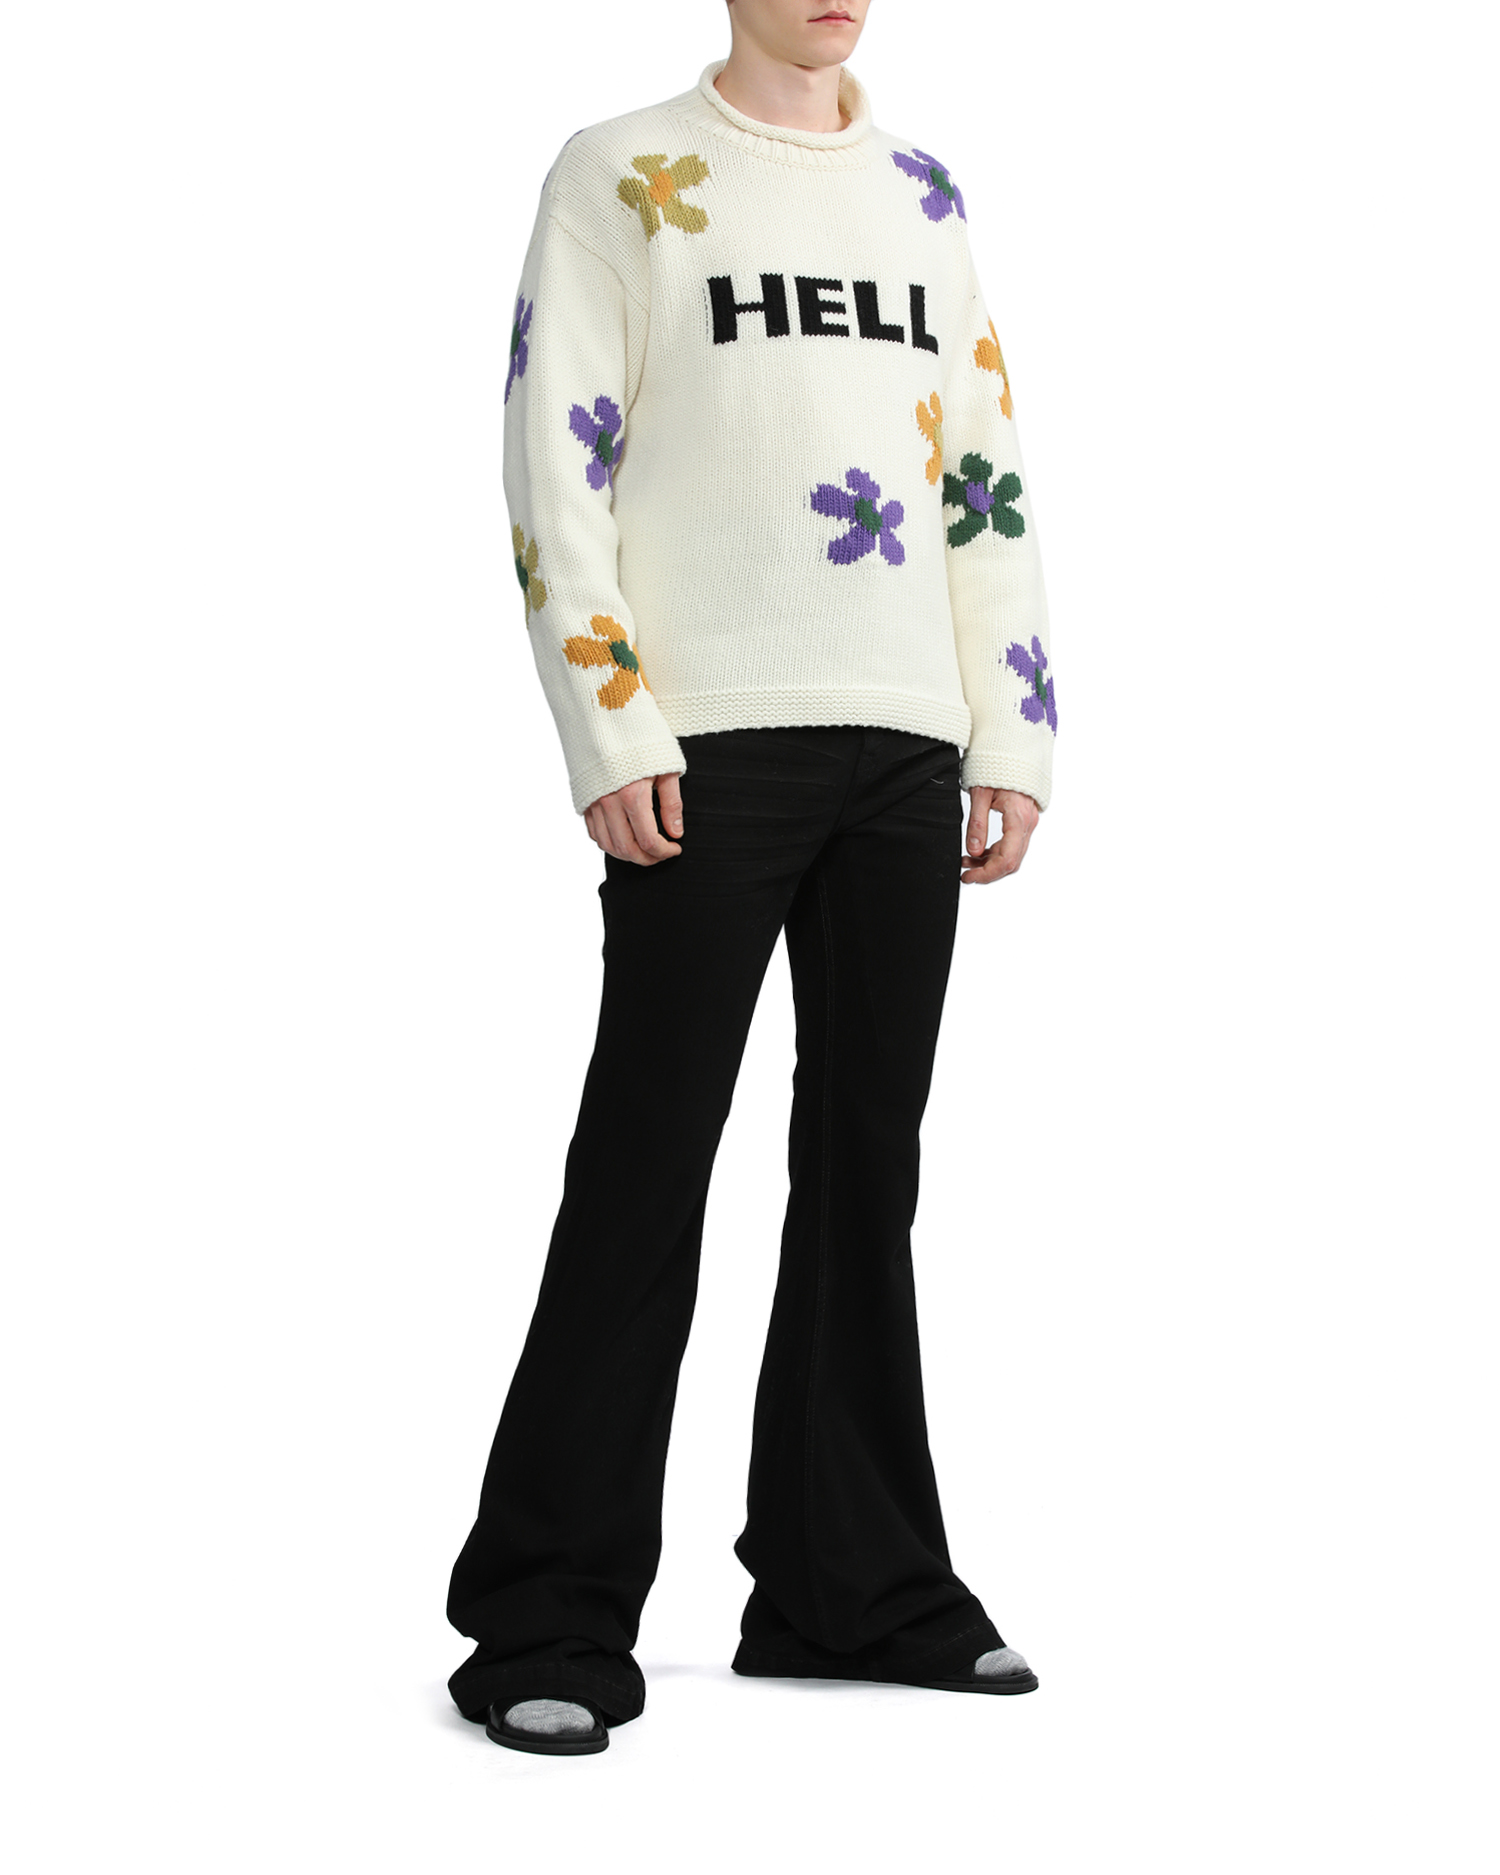 Hell's flowers knit crew neck